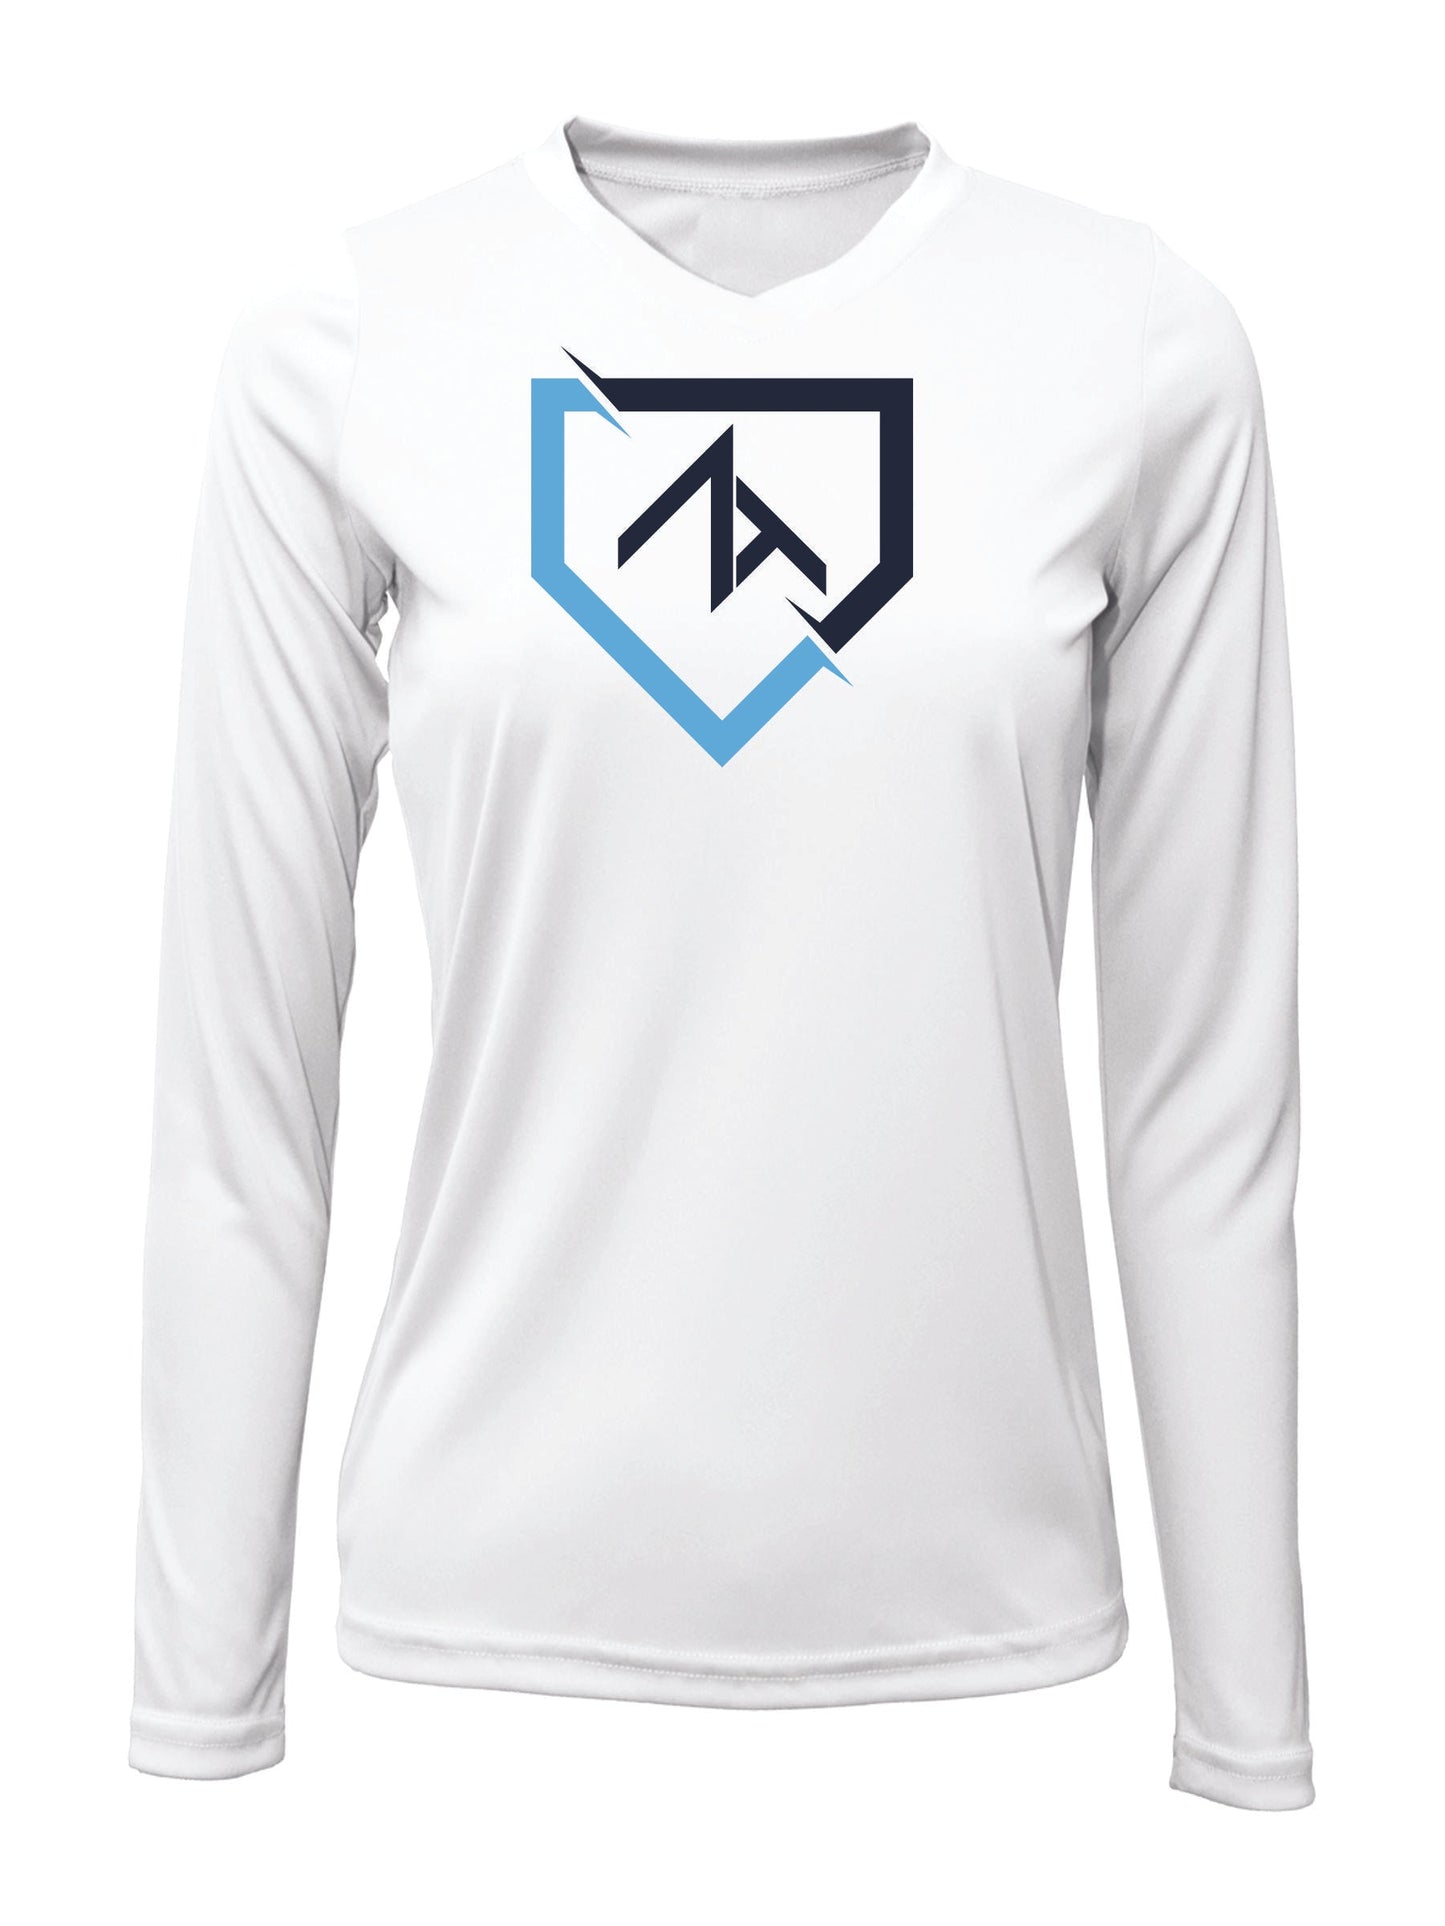 V-Neck Long Sleeve "FRACTURED PLATE" Dri-fit T-shirt